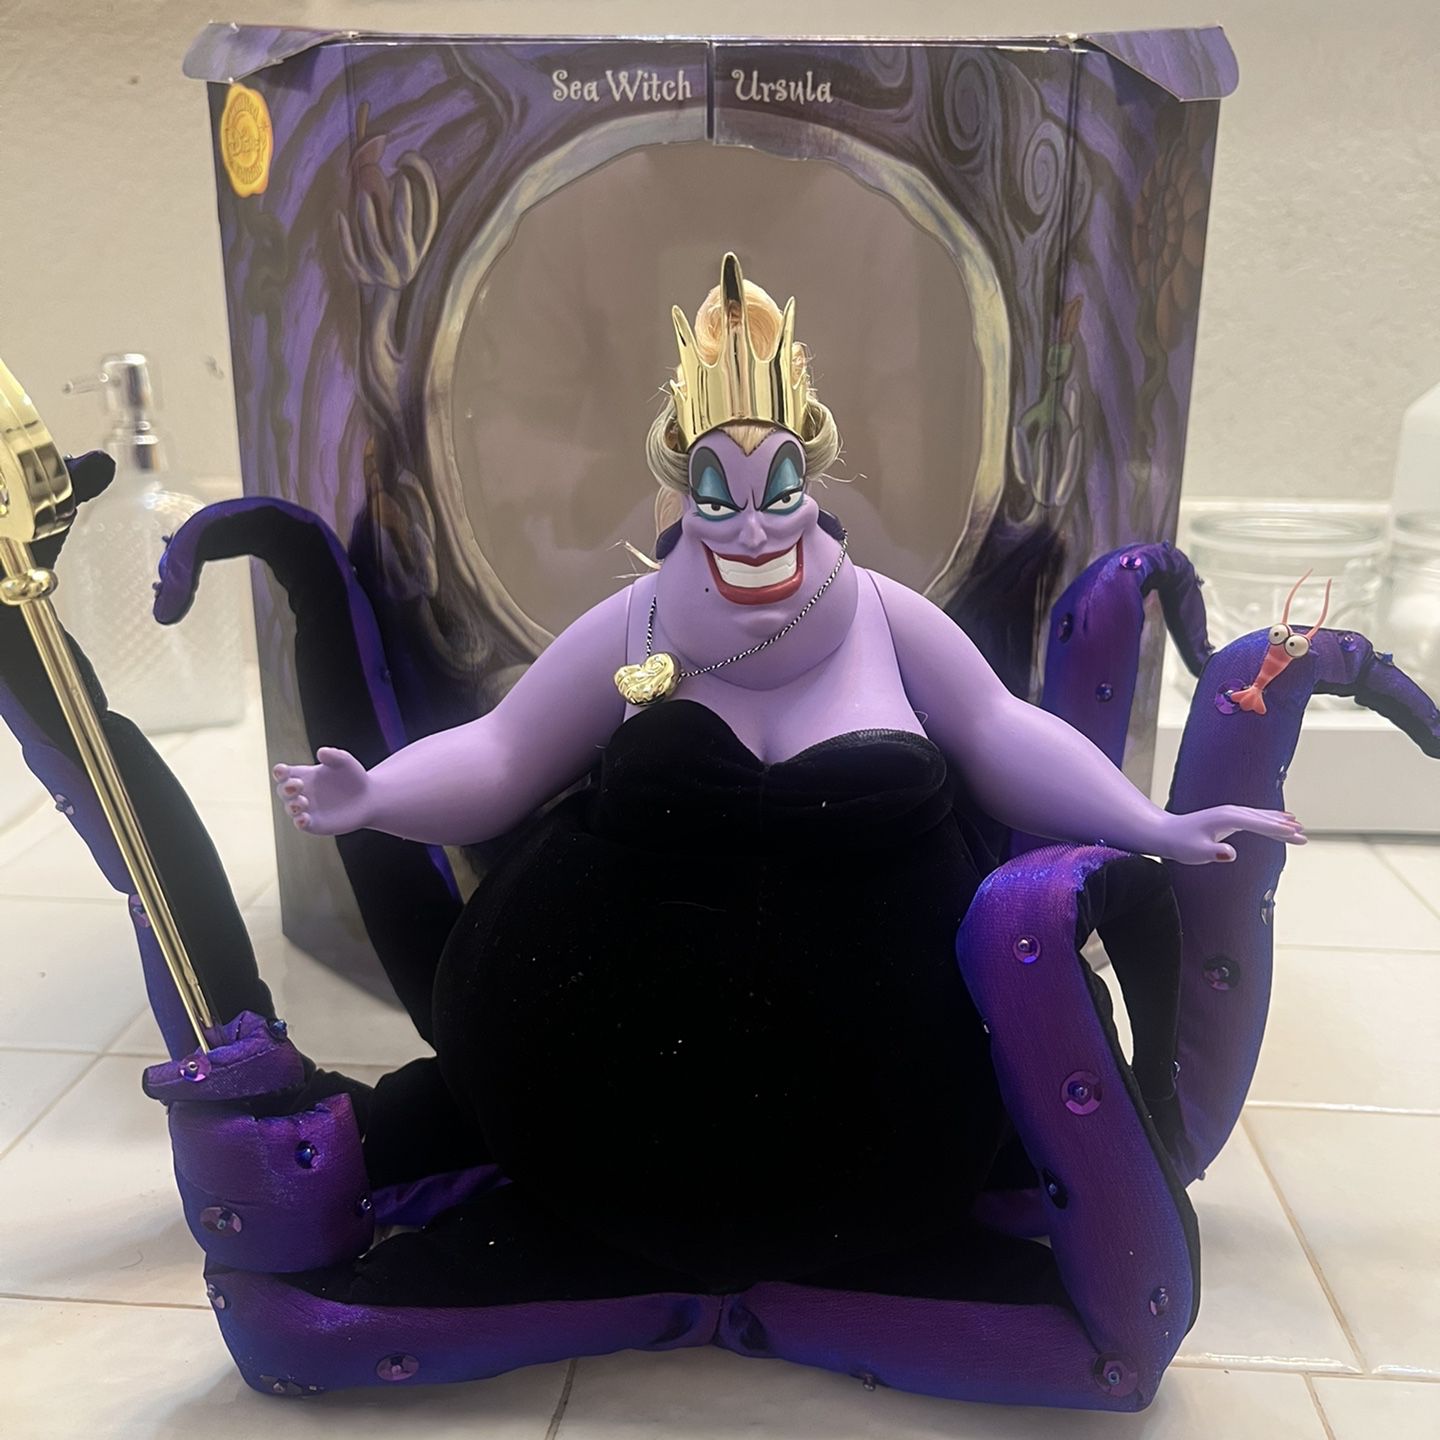 Disney's The Little Mermaid, Sea Witch Ursula Doll production. ..